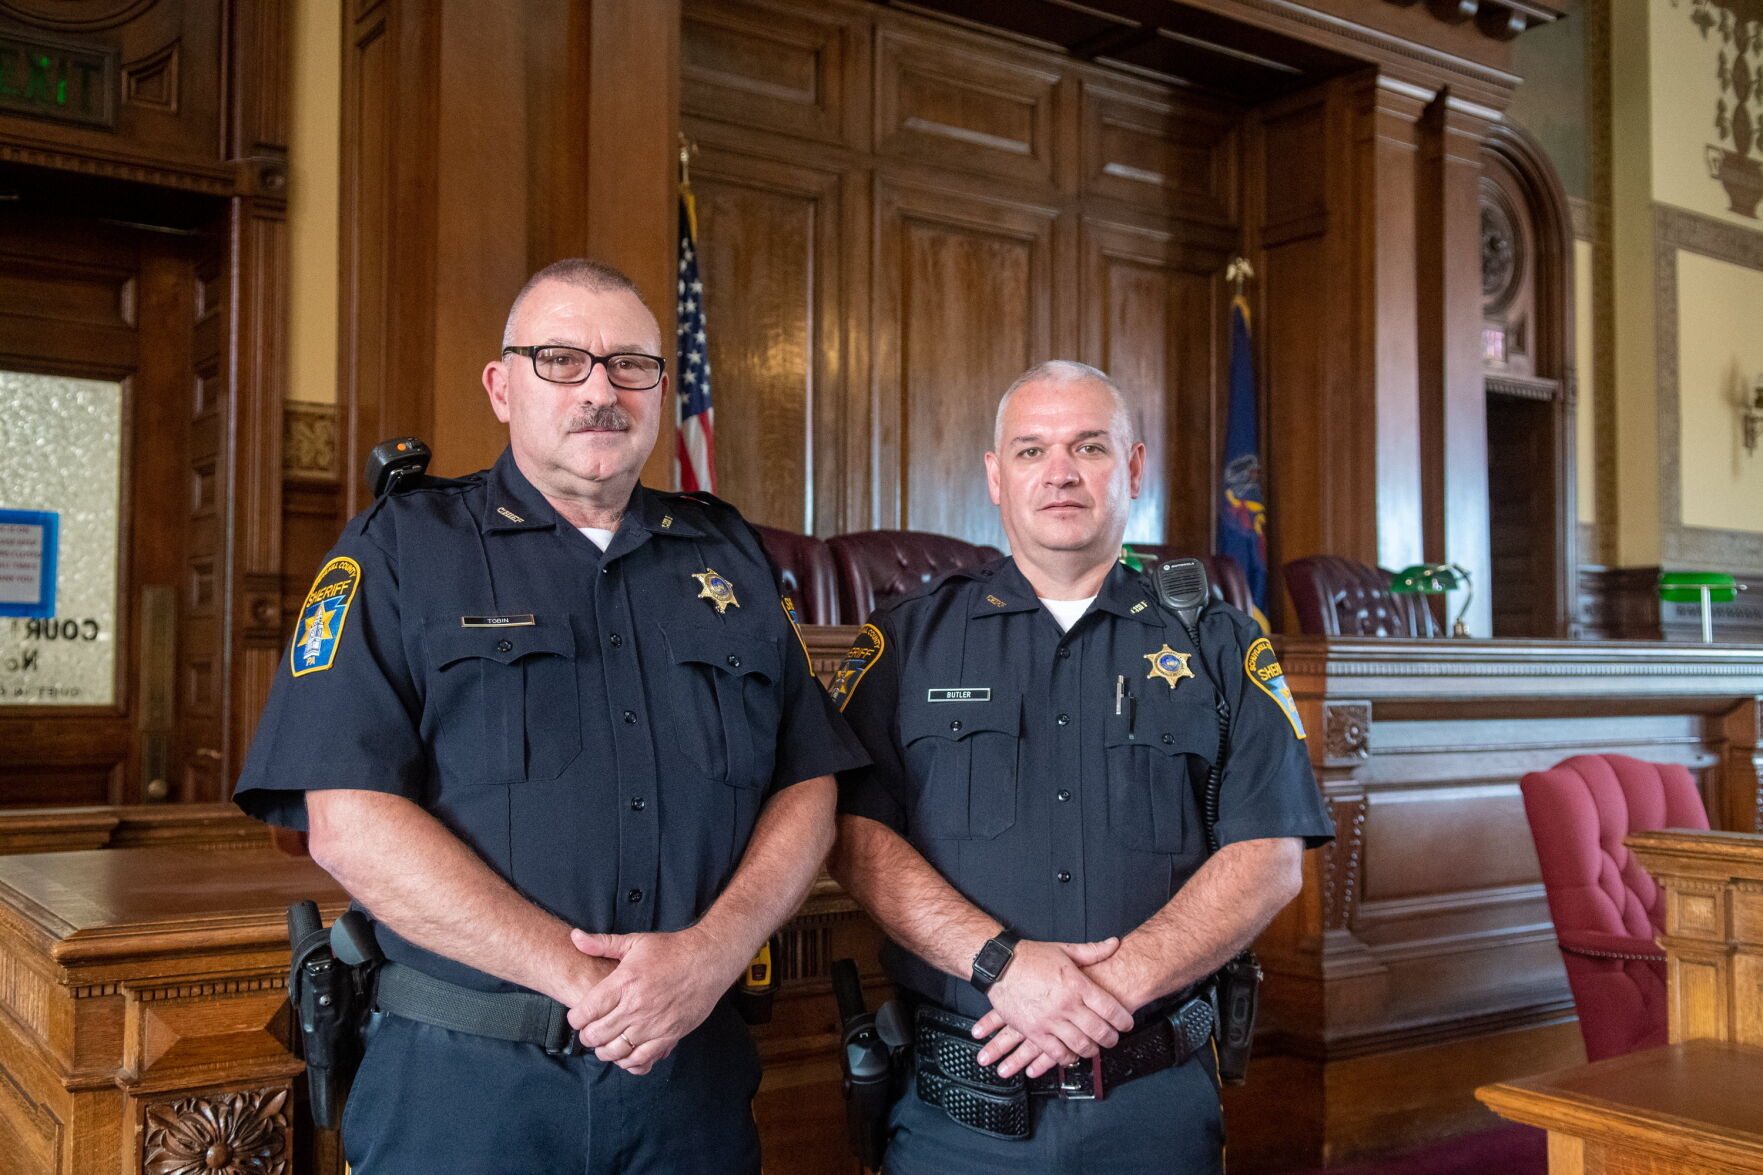 Schuylkill County chief deputy sheriff praised at retirement News republicanherald picture